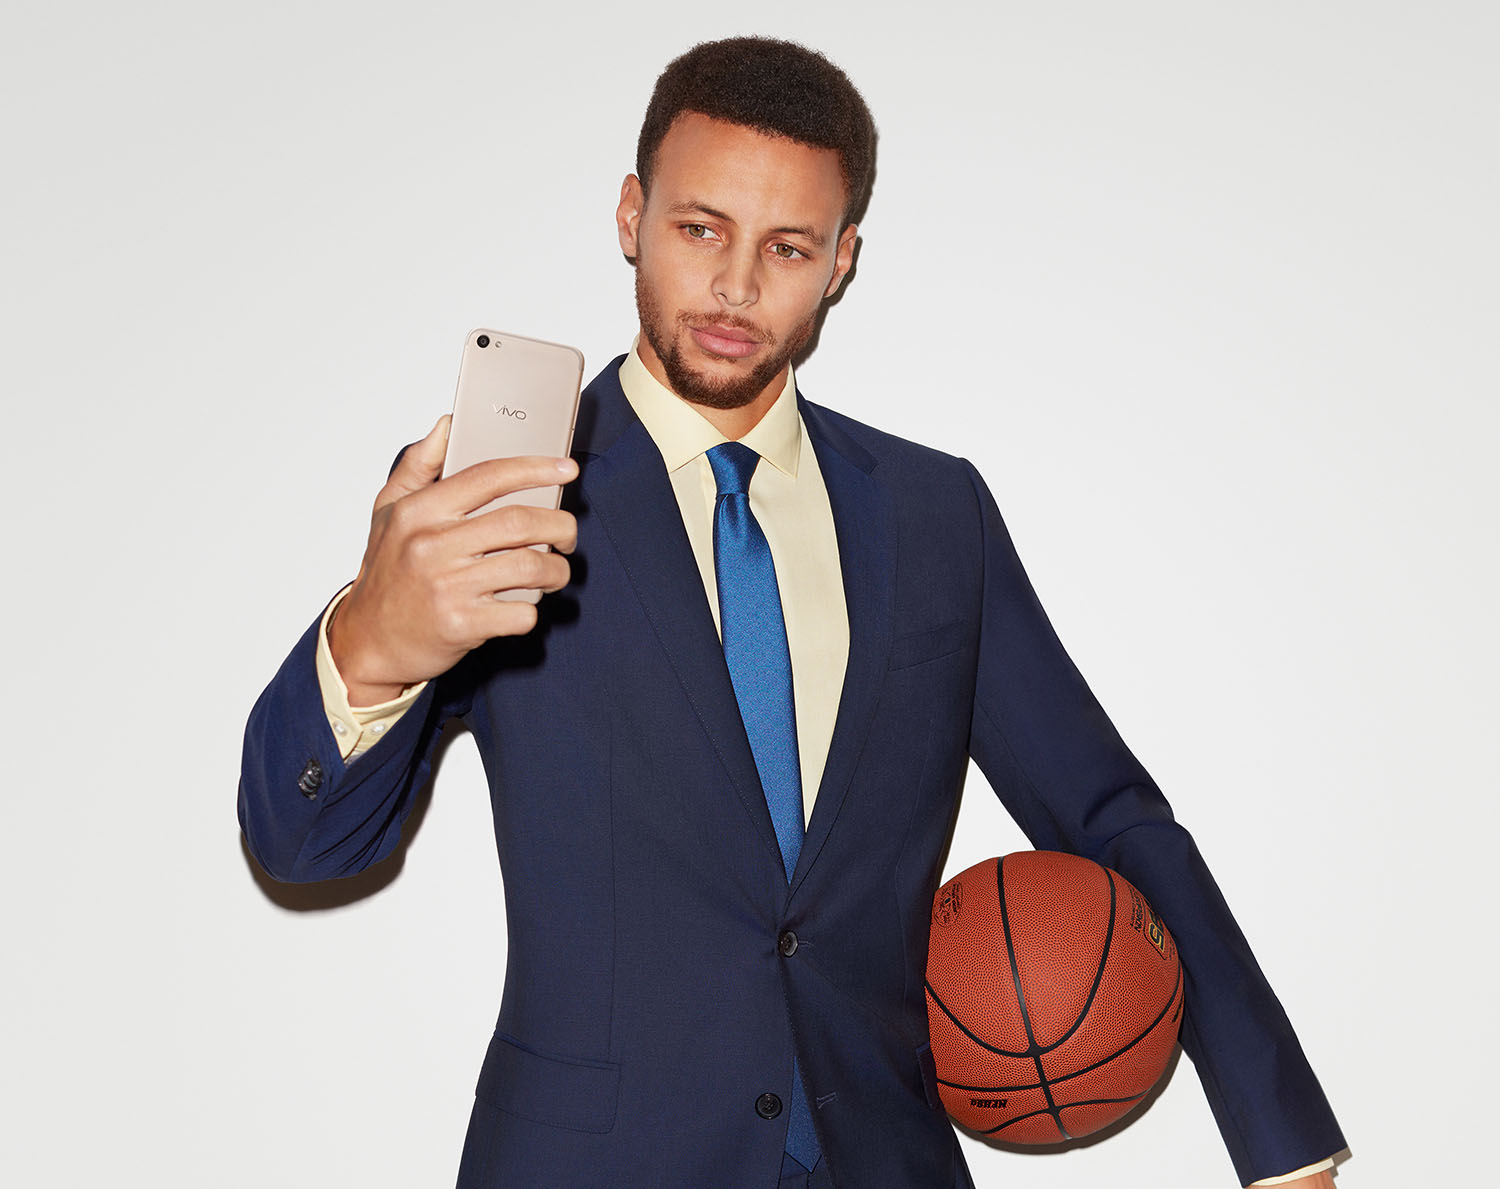 Stephen Curry all praises on the new ‘Groufie’ technology of Vivo V5s